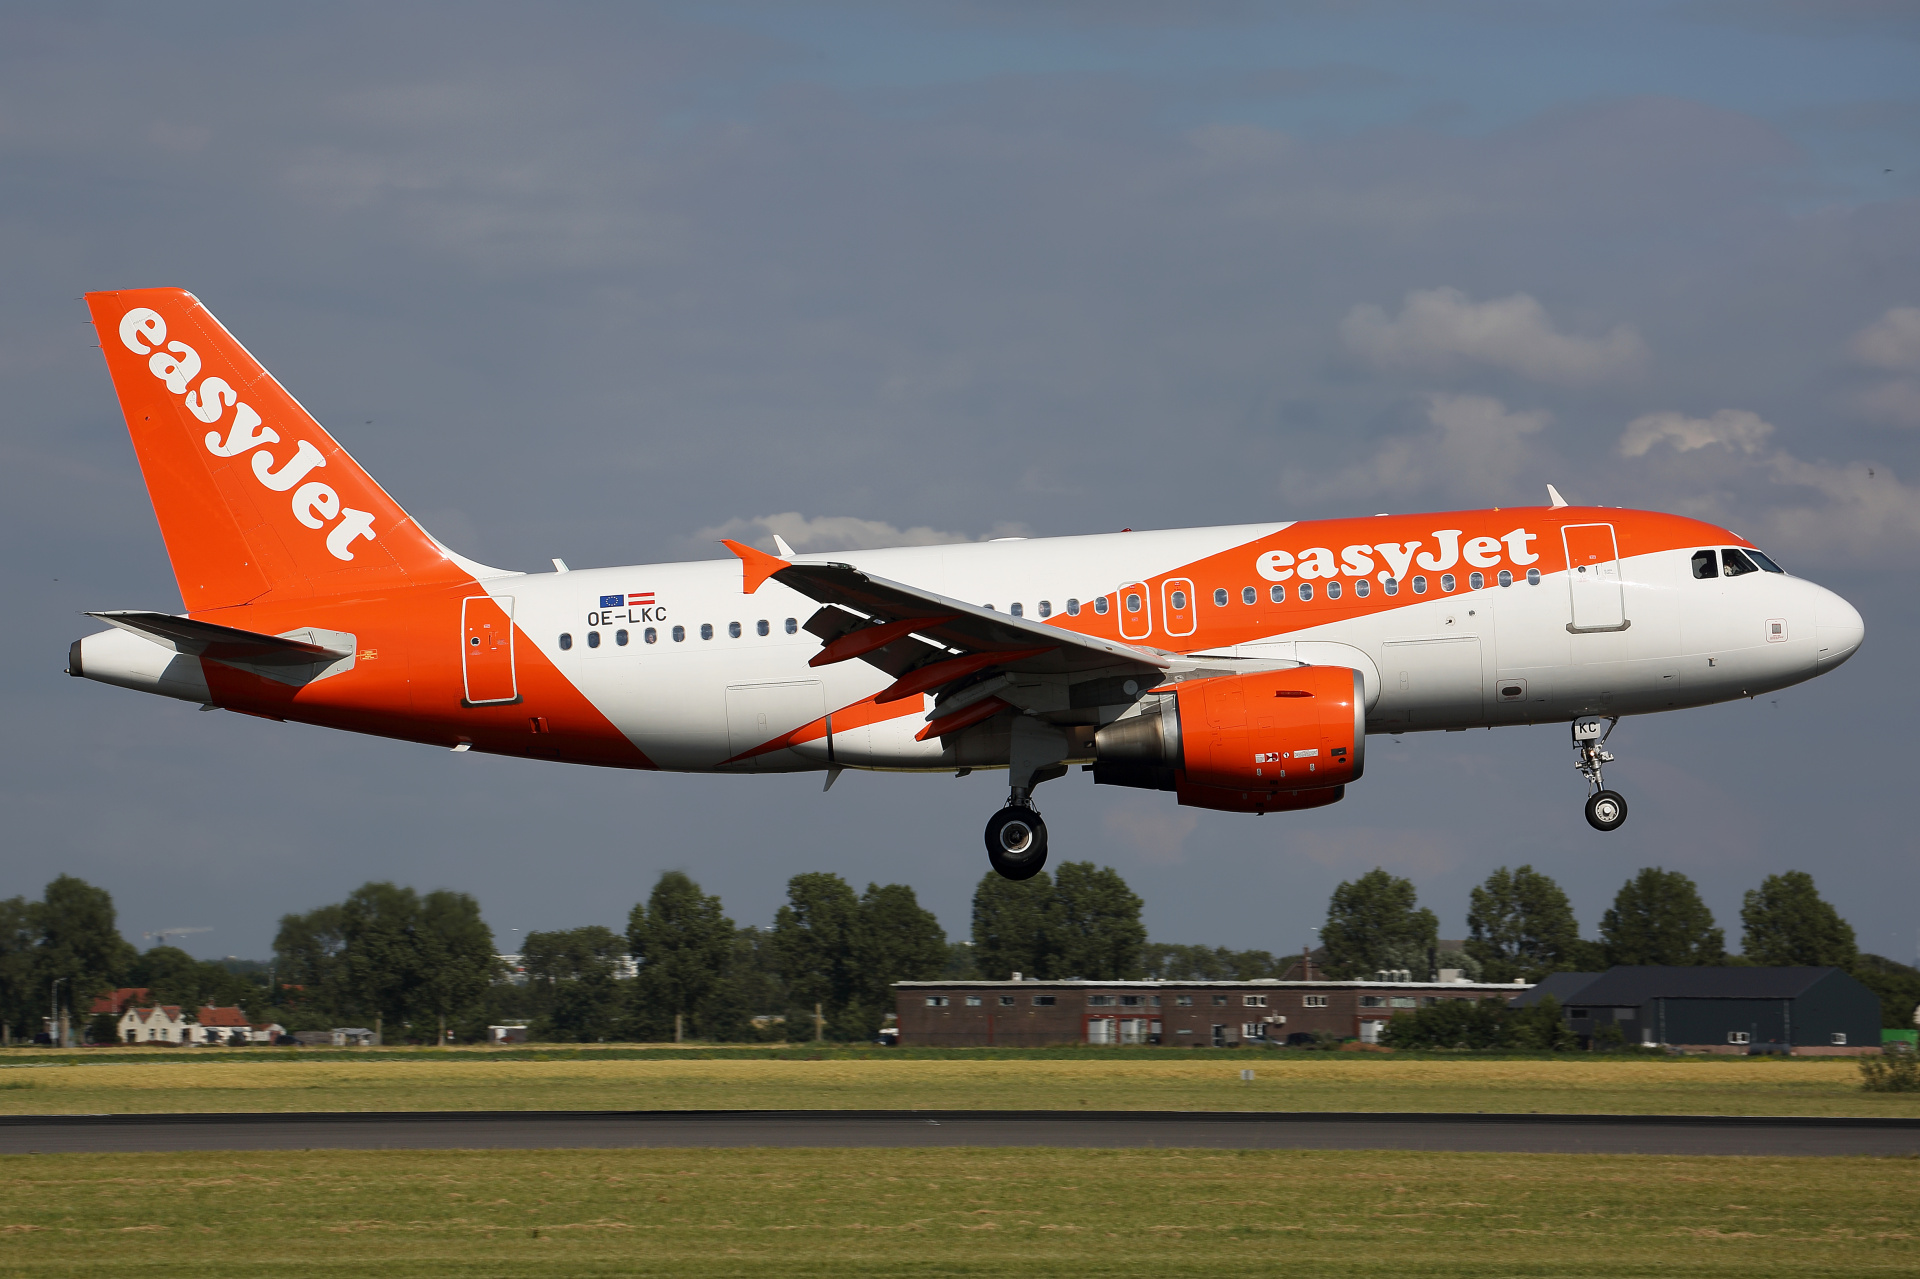 OE-LKC, EasyJet (Aircraft » Schiphol Spotting » Airbus A319-100)